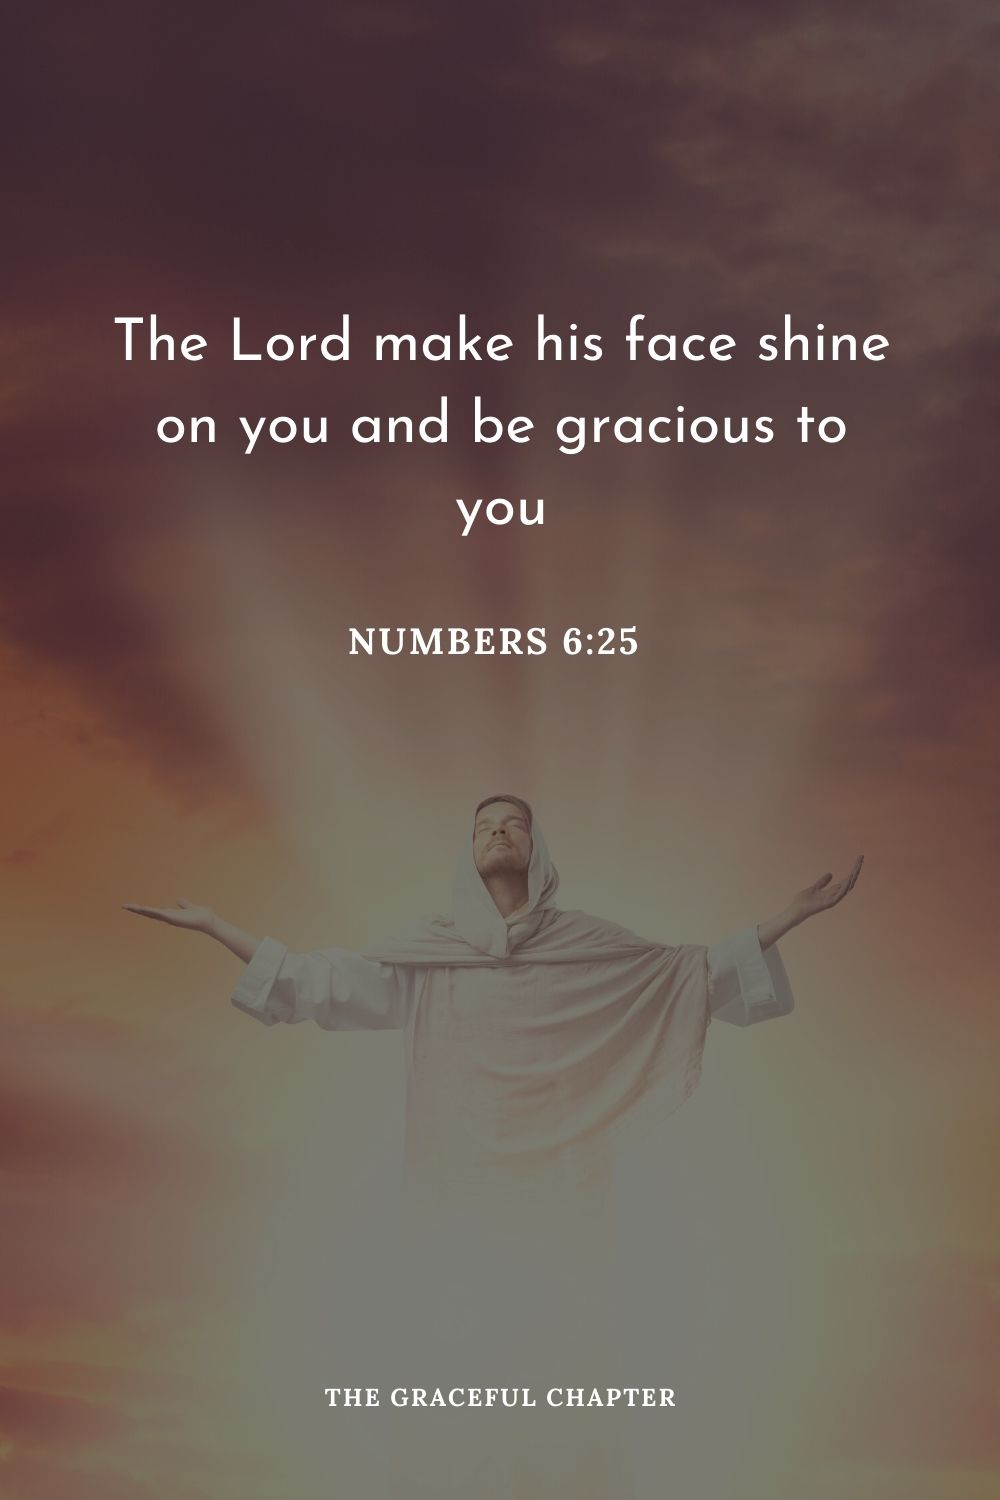 The Lord make his face shine on you and be gracious to you Numbers 6:25